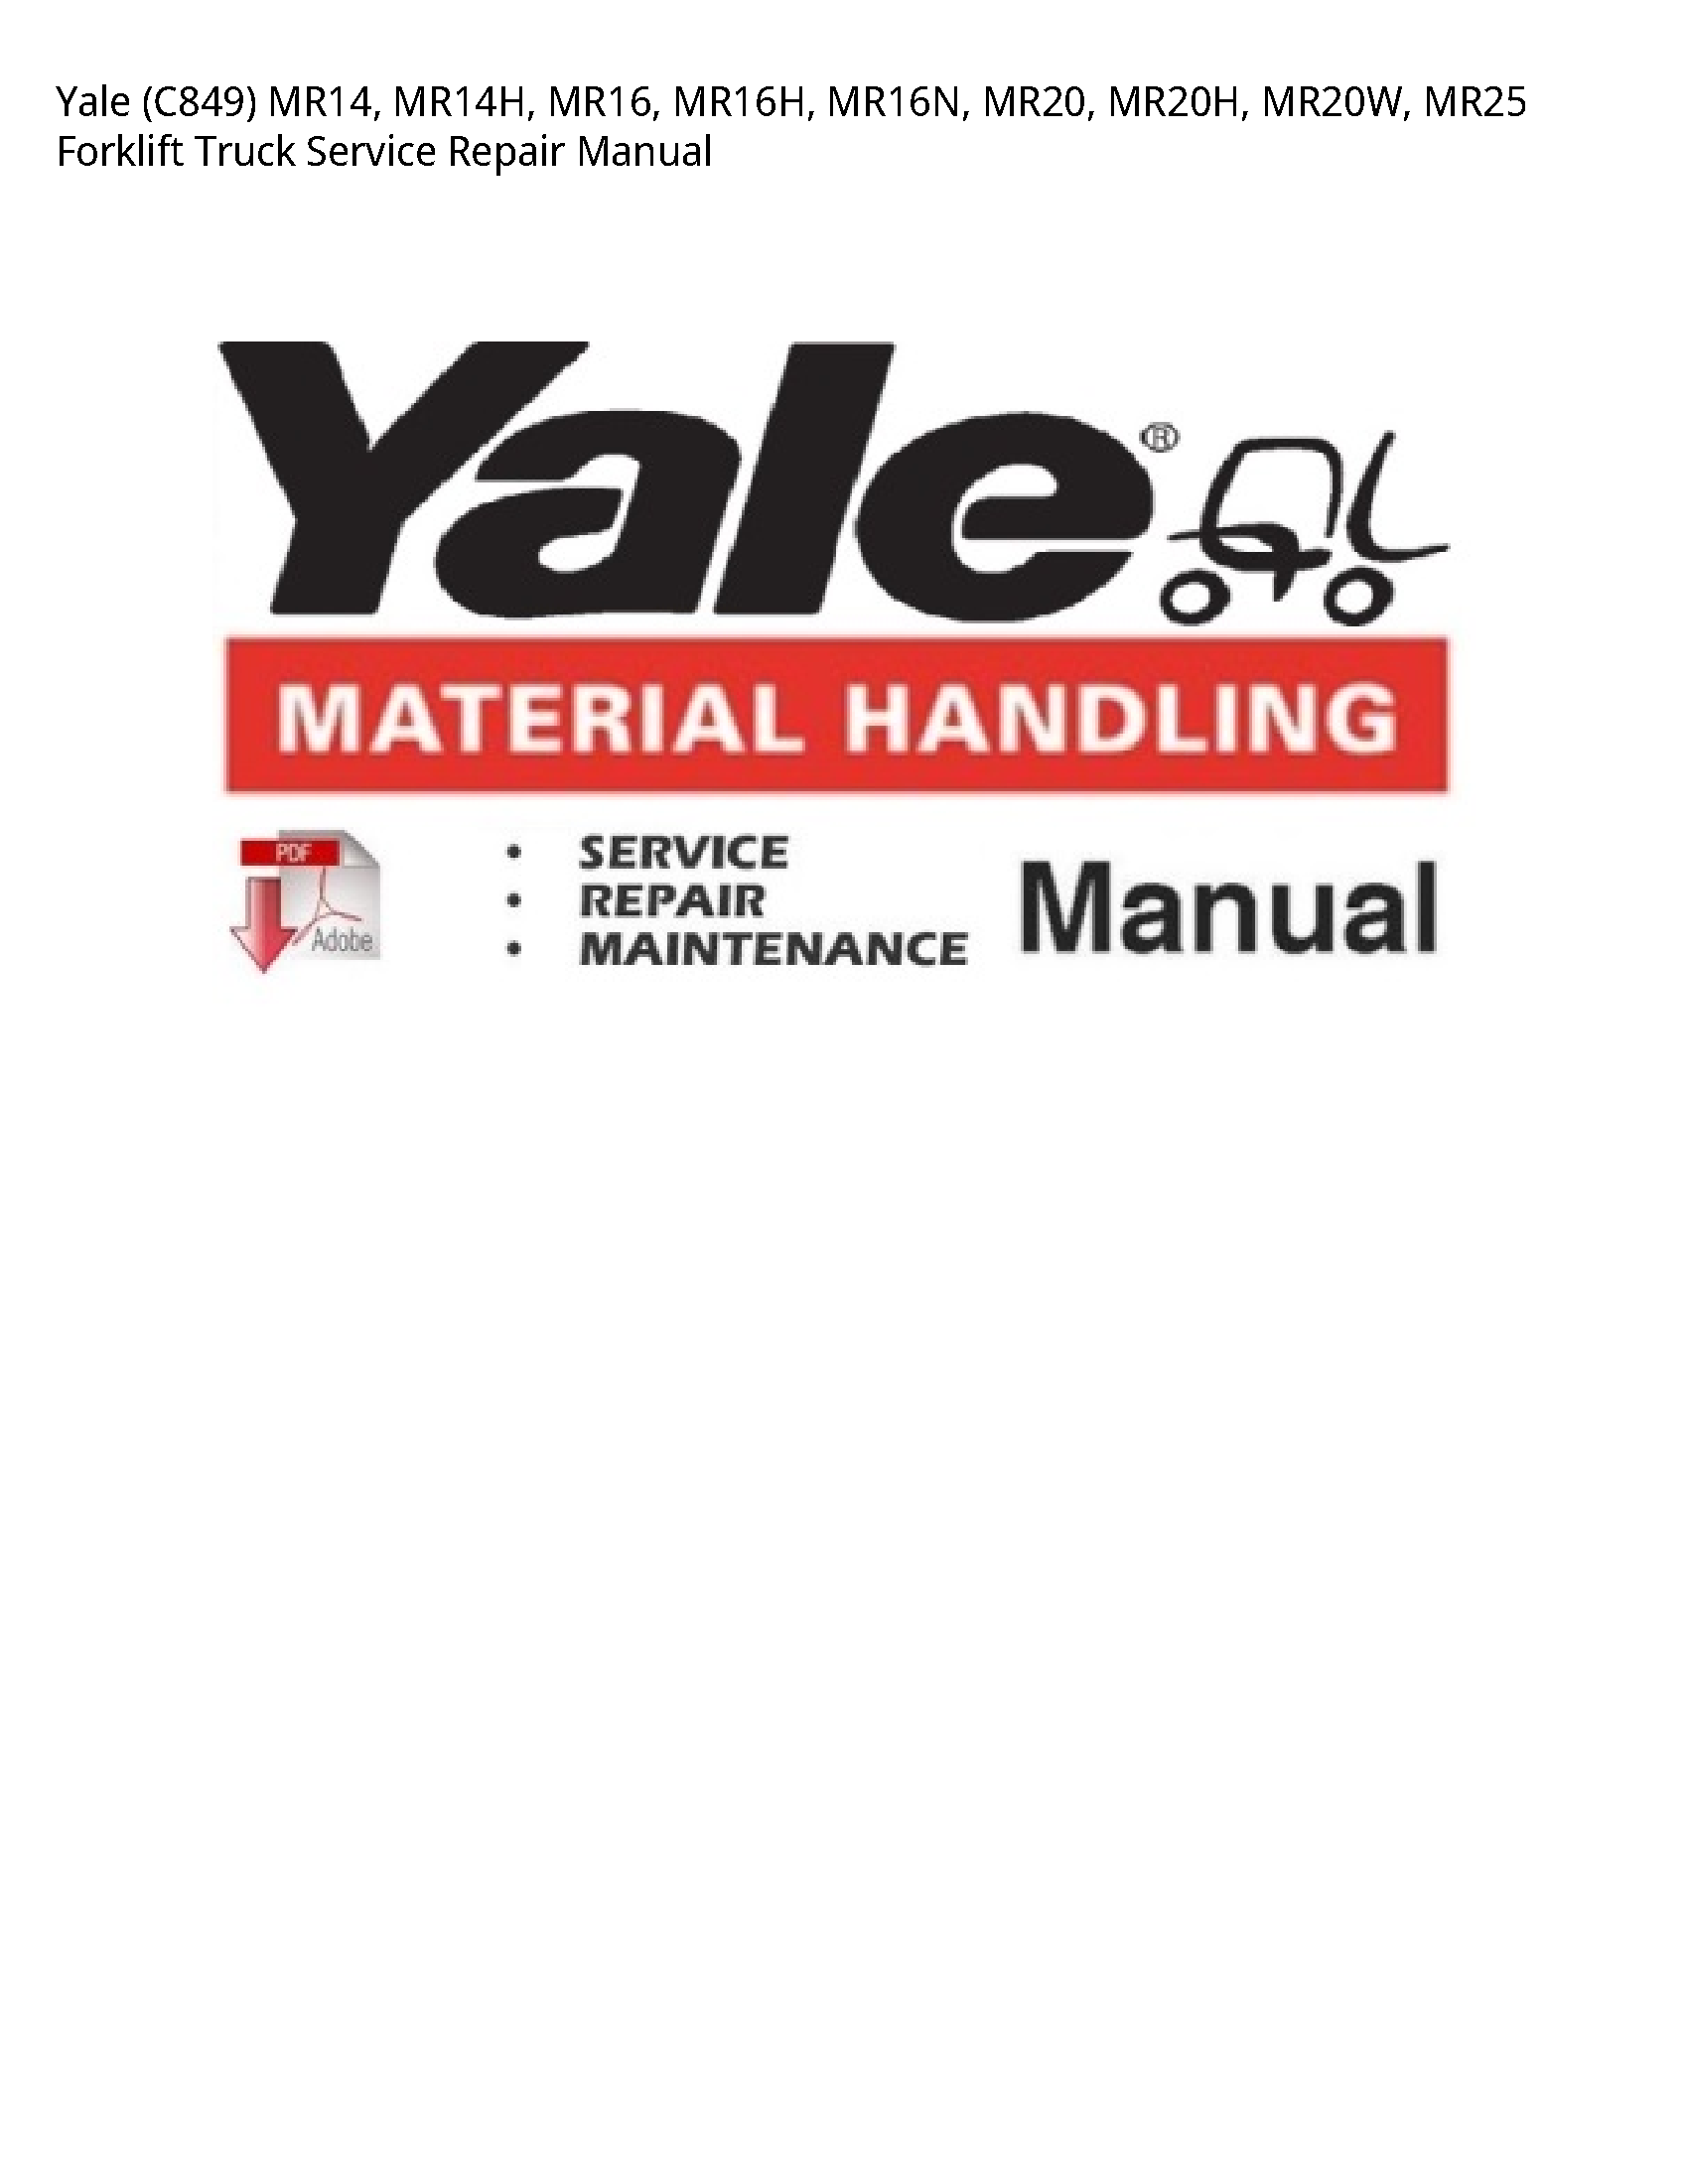 Yale (C849) Forklift Truck manual